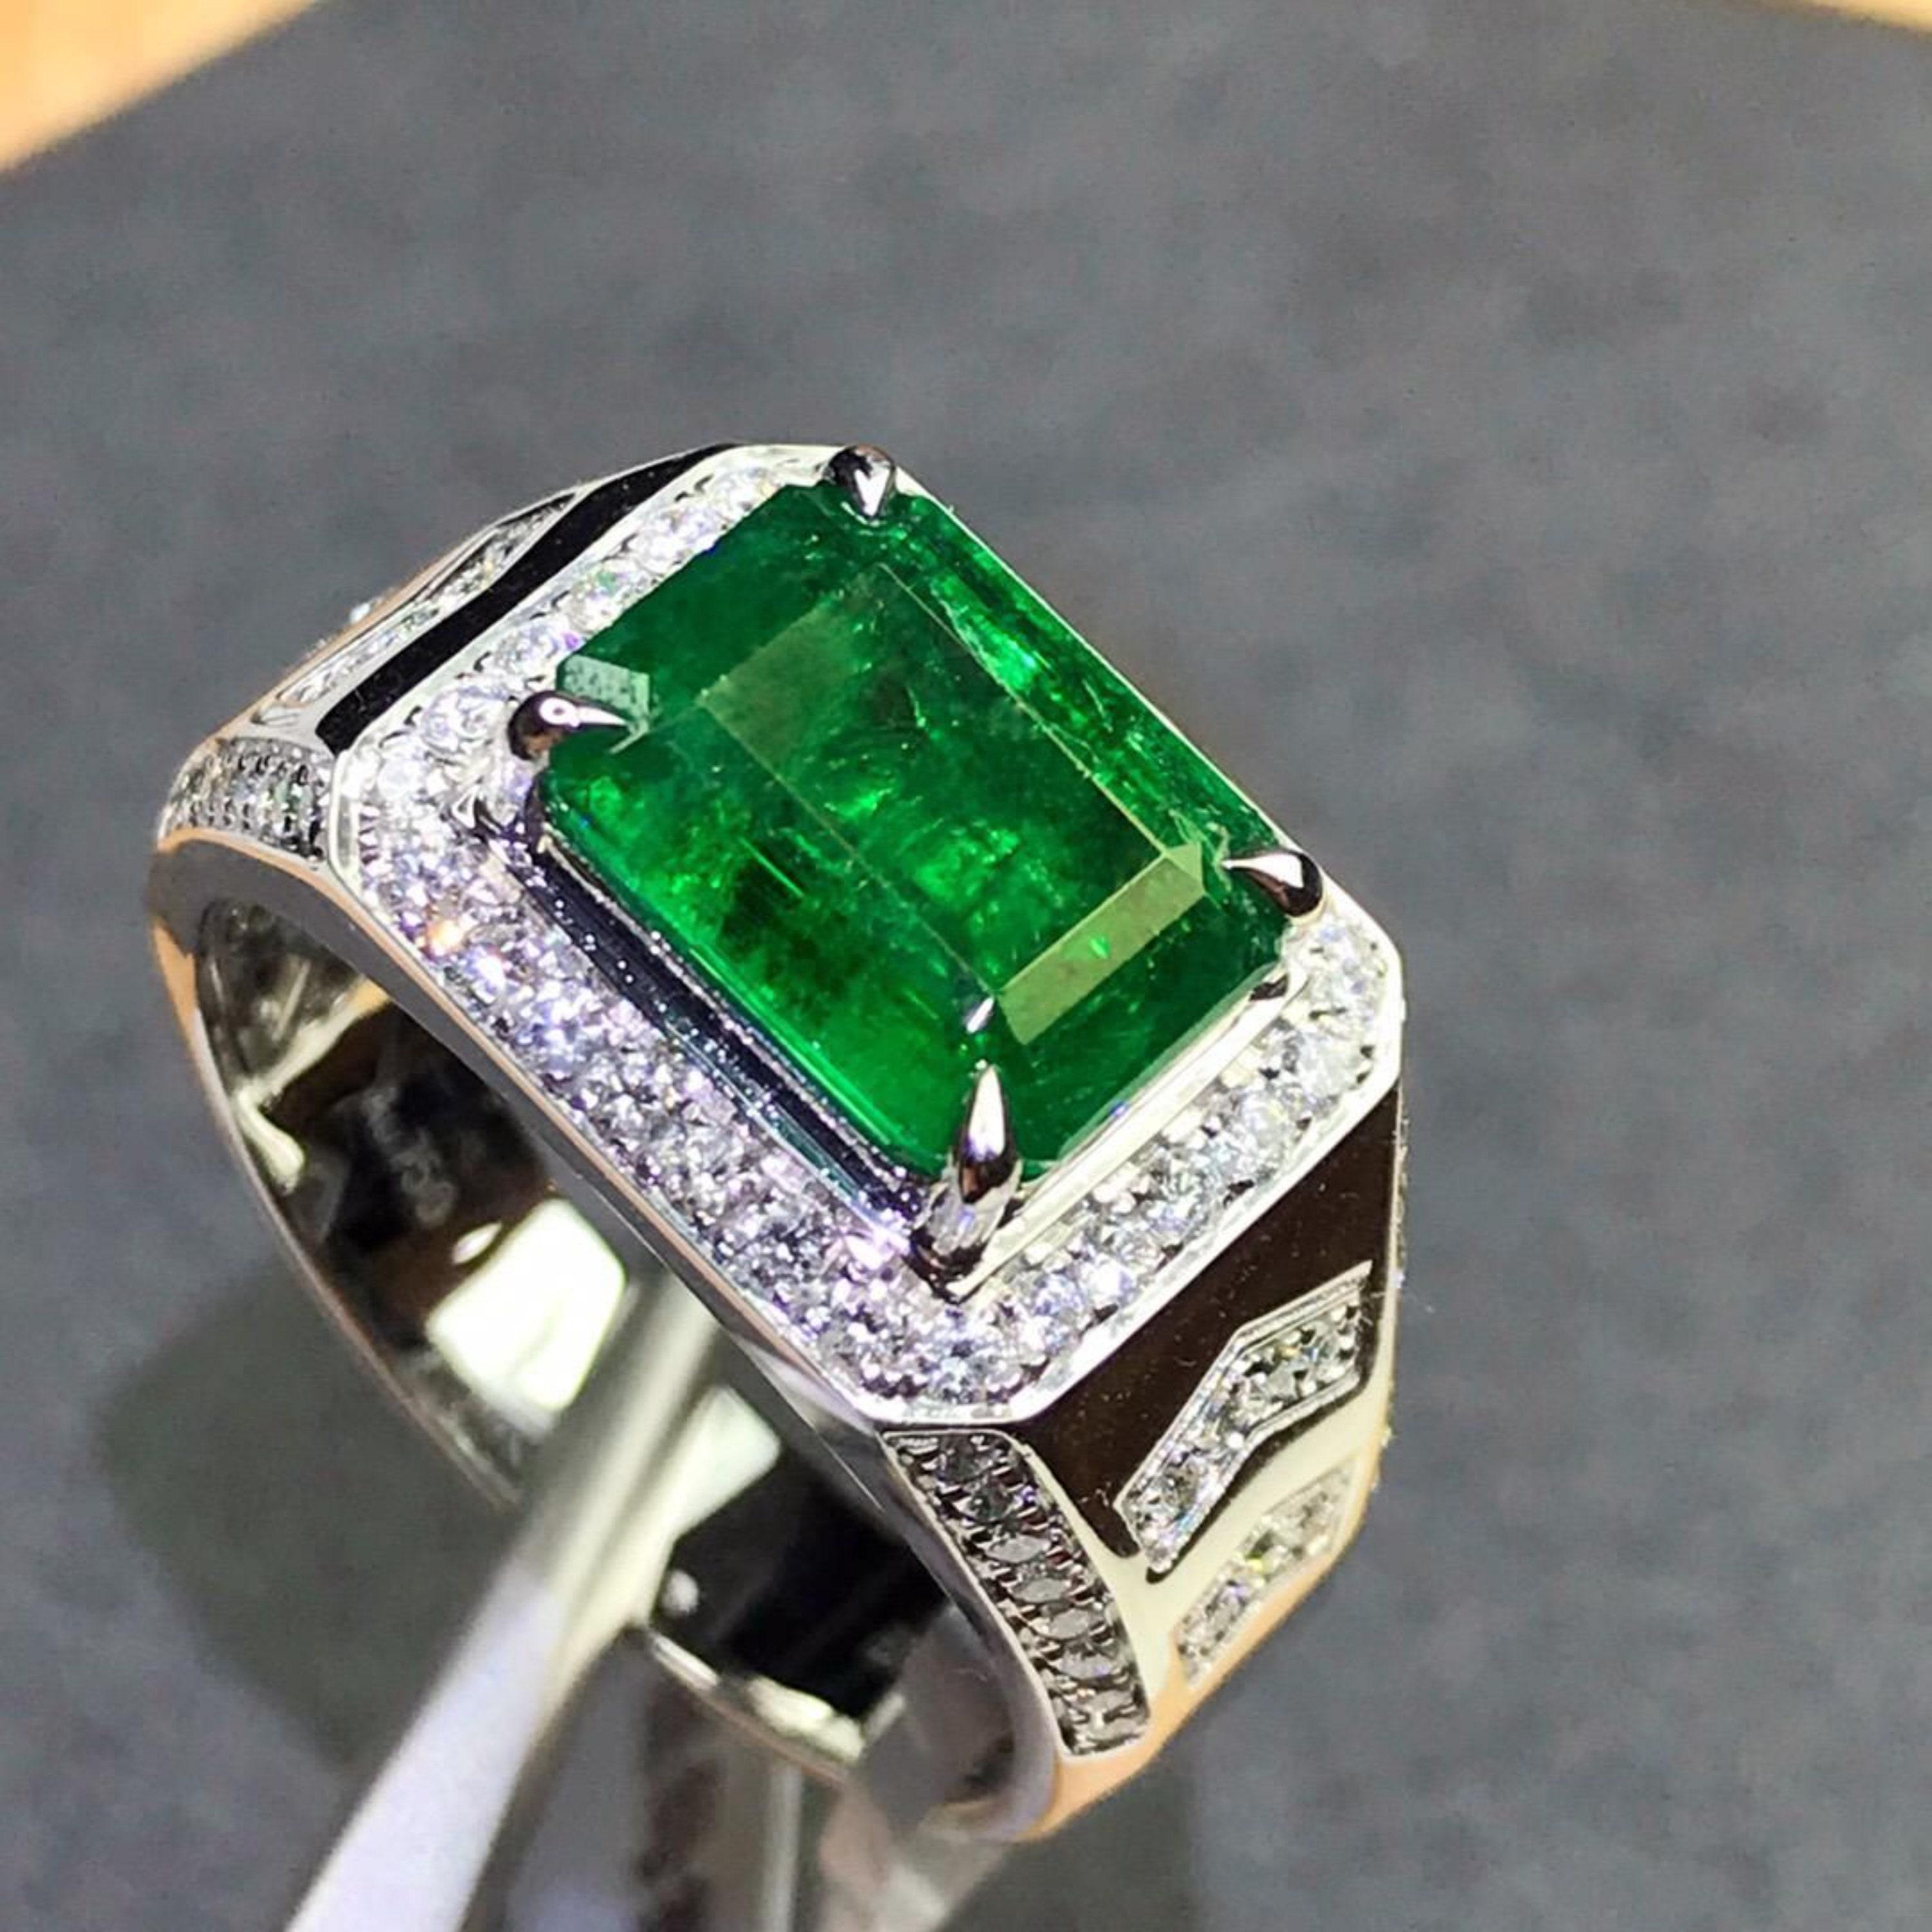 For Sale:  Certified 3 CT Natural Emerald Diamond Engagement Ring in 18K Gold For Men's 6